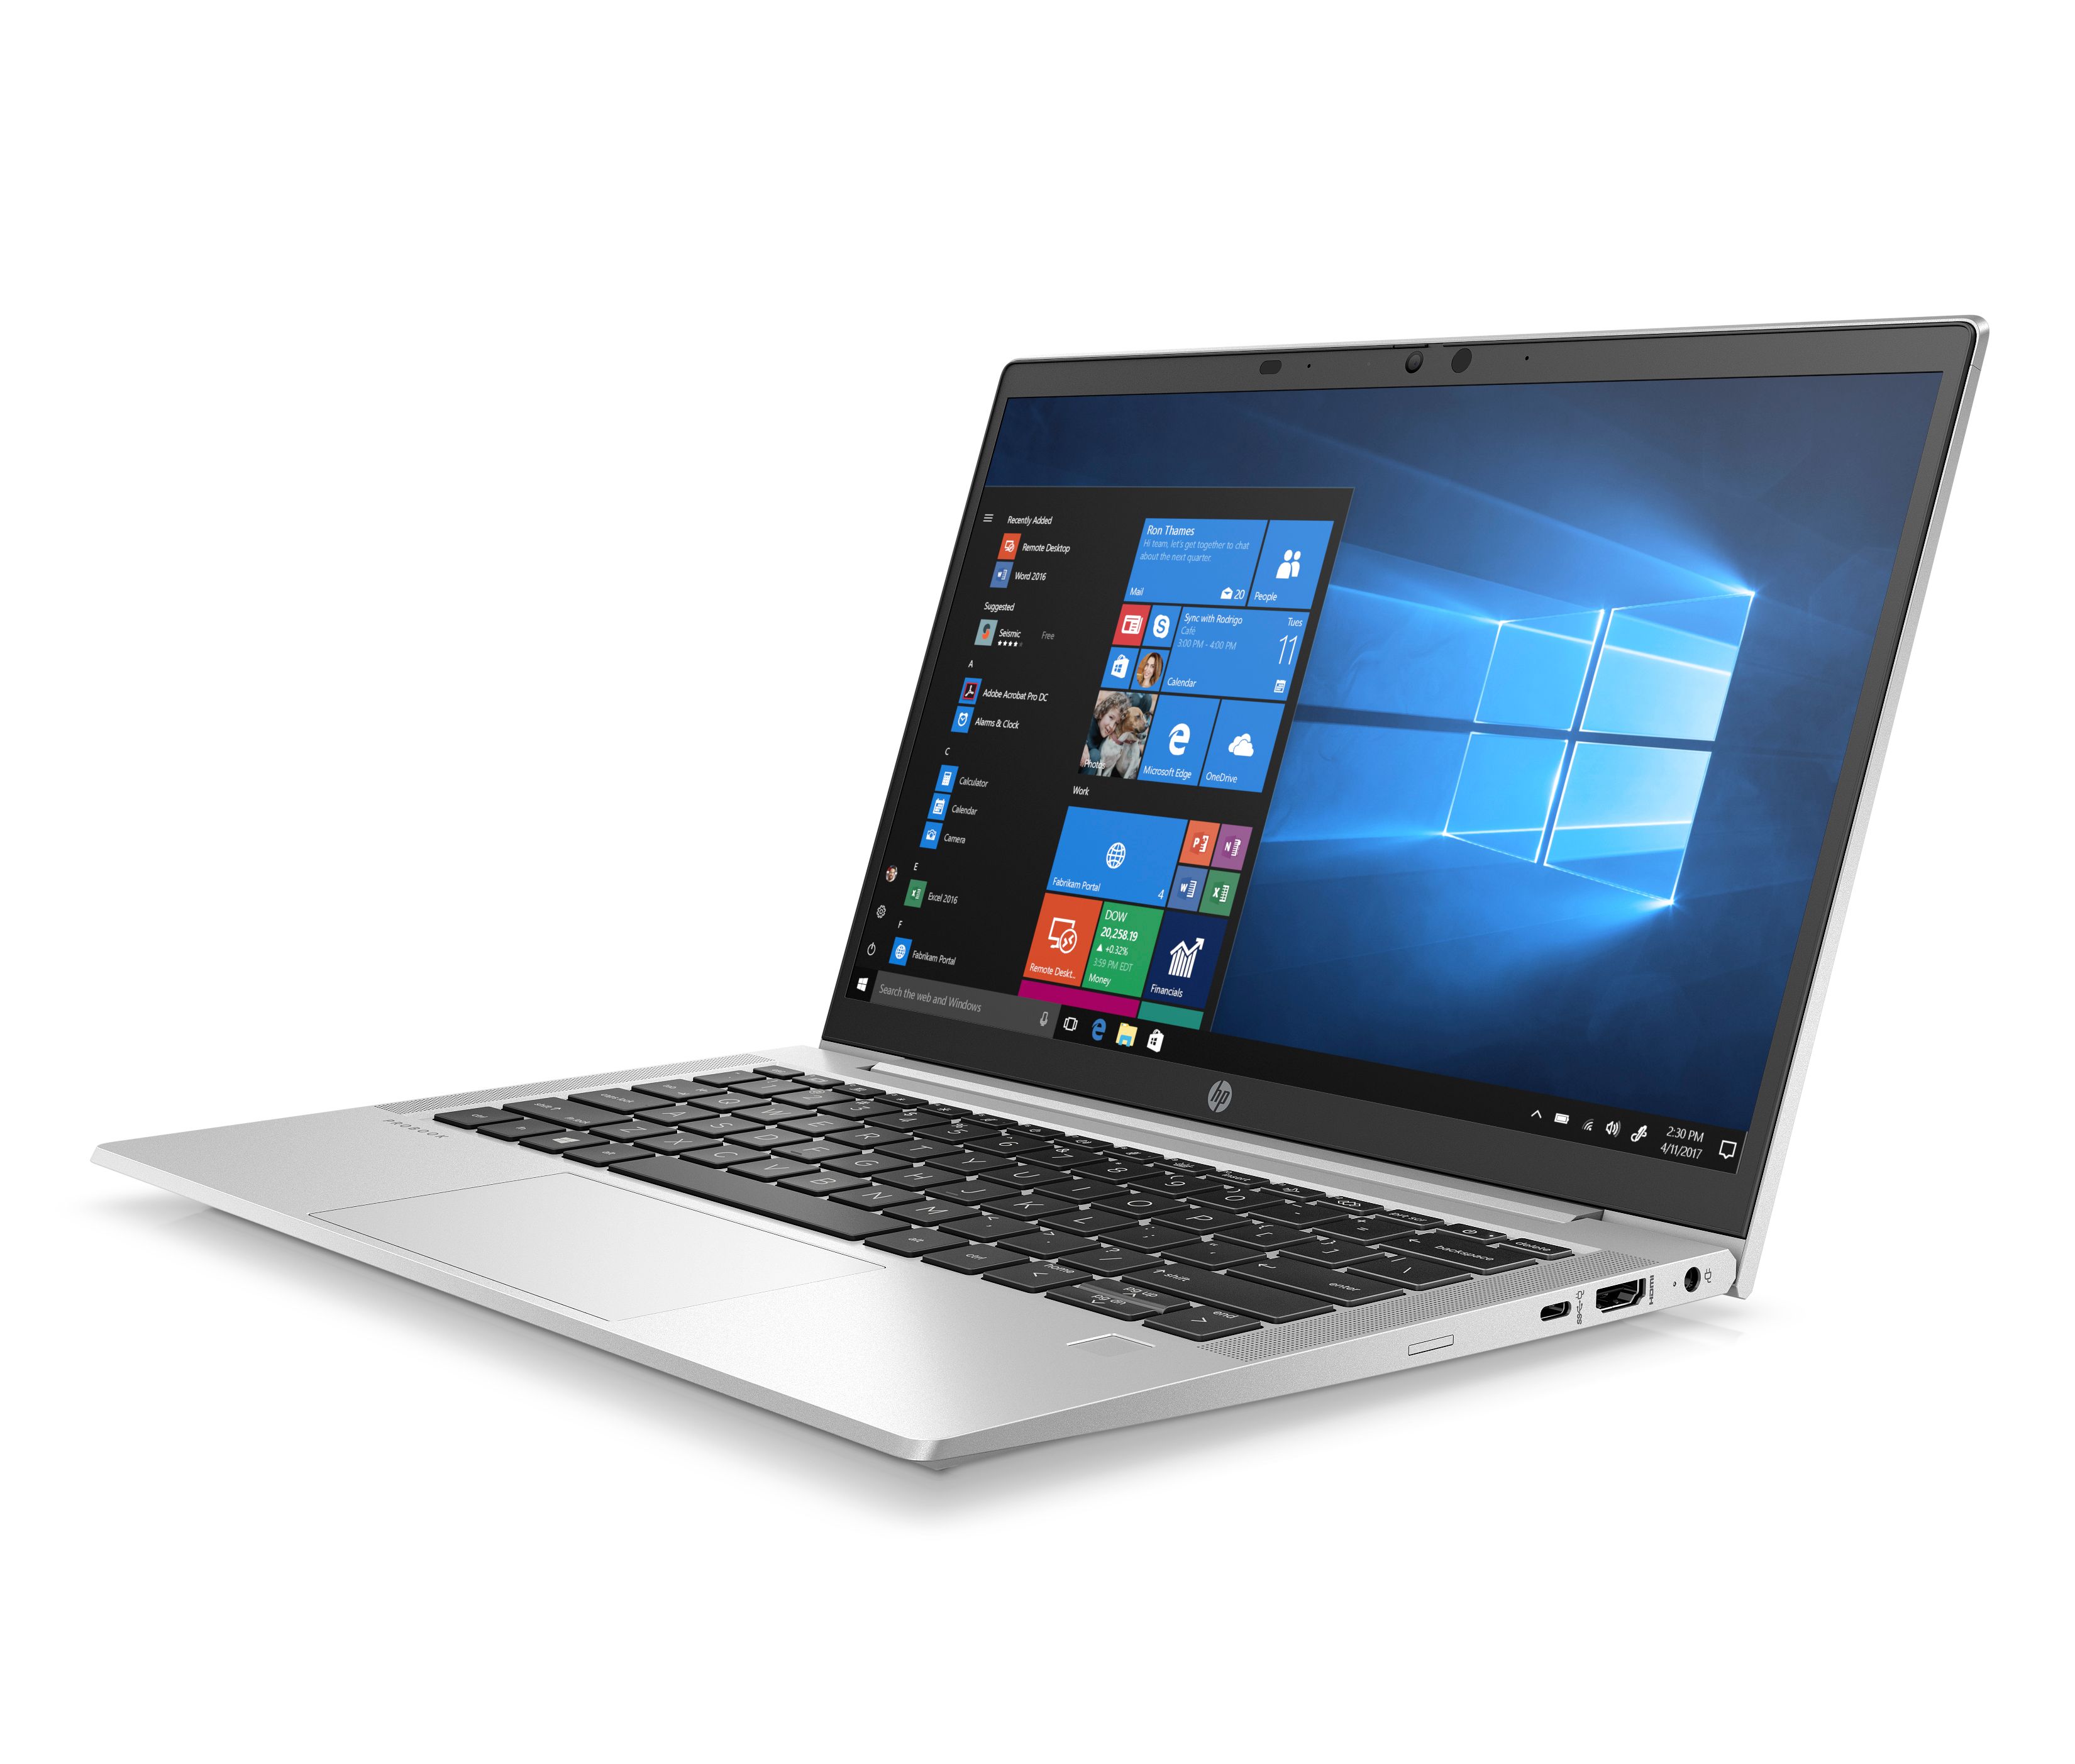 HP unveils its lightest AMD-based consumer laptop